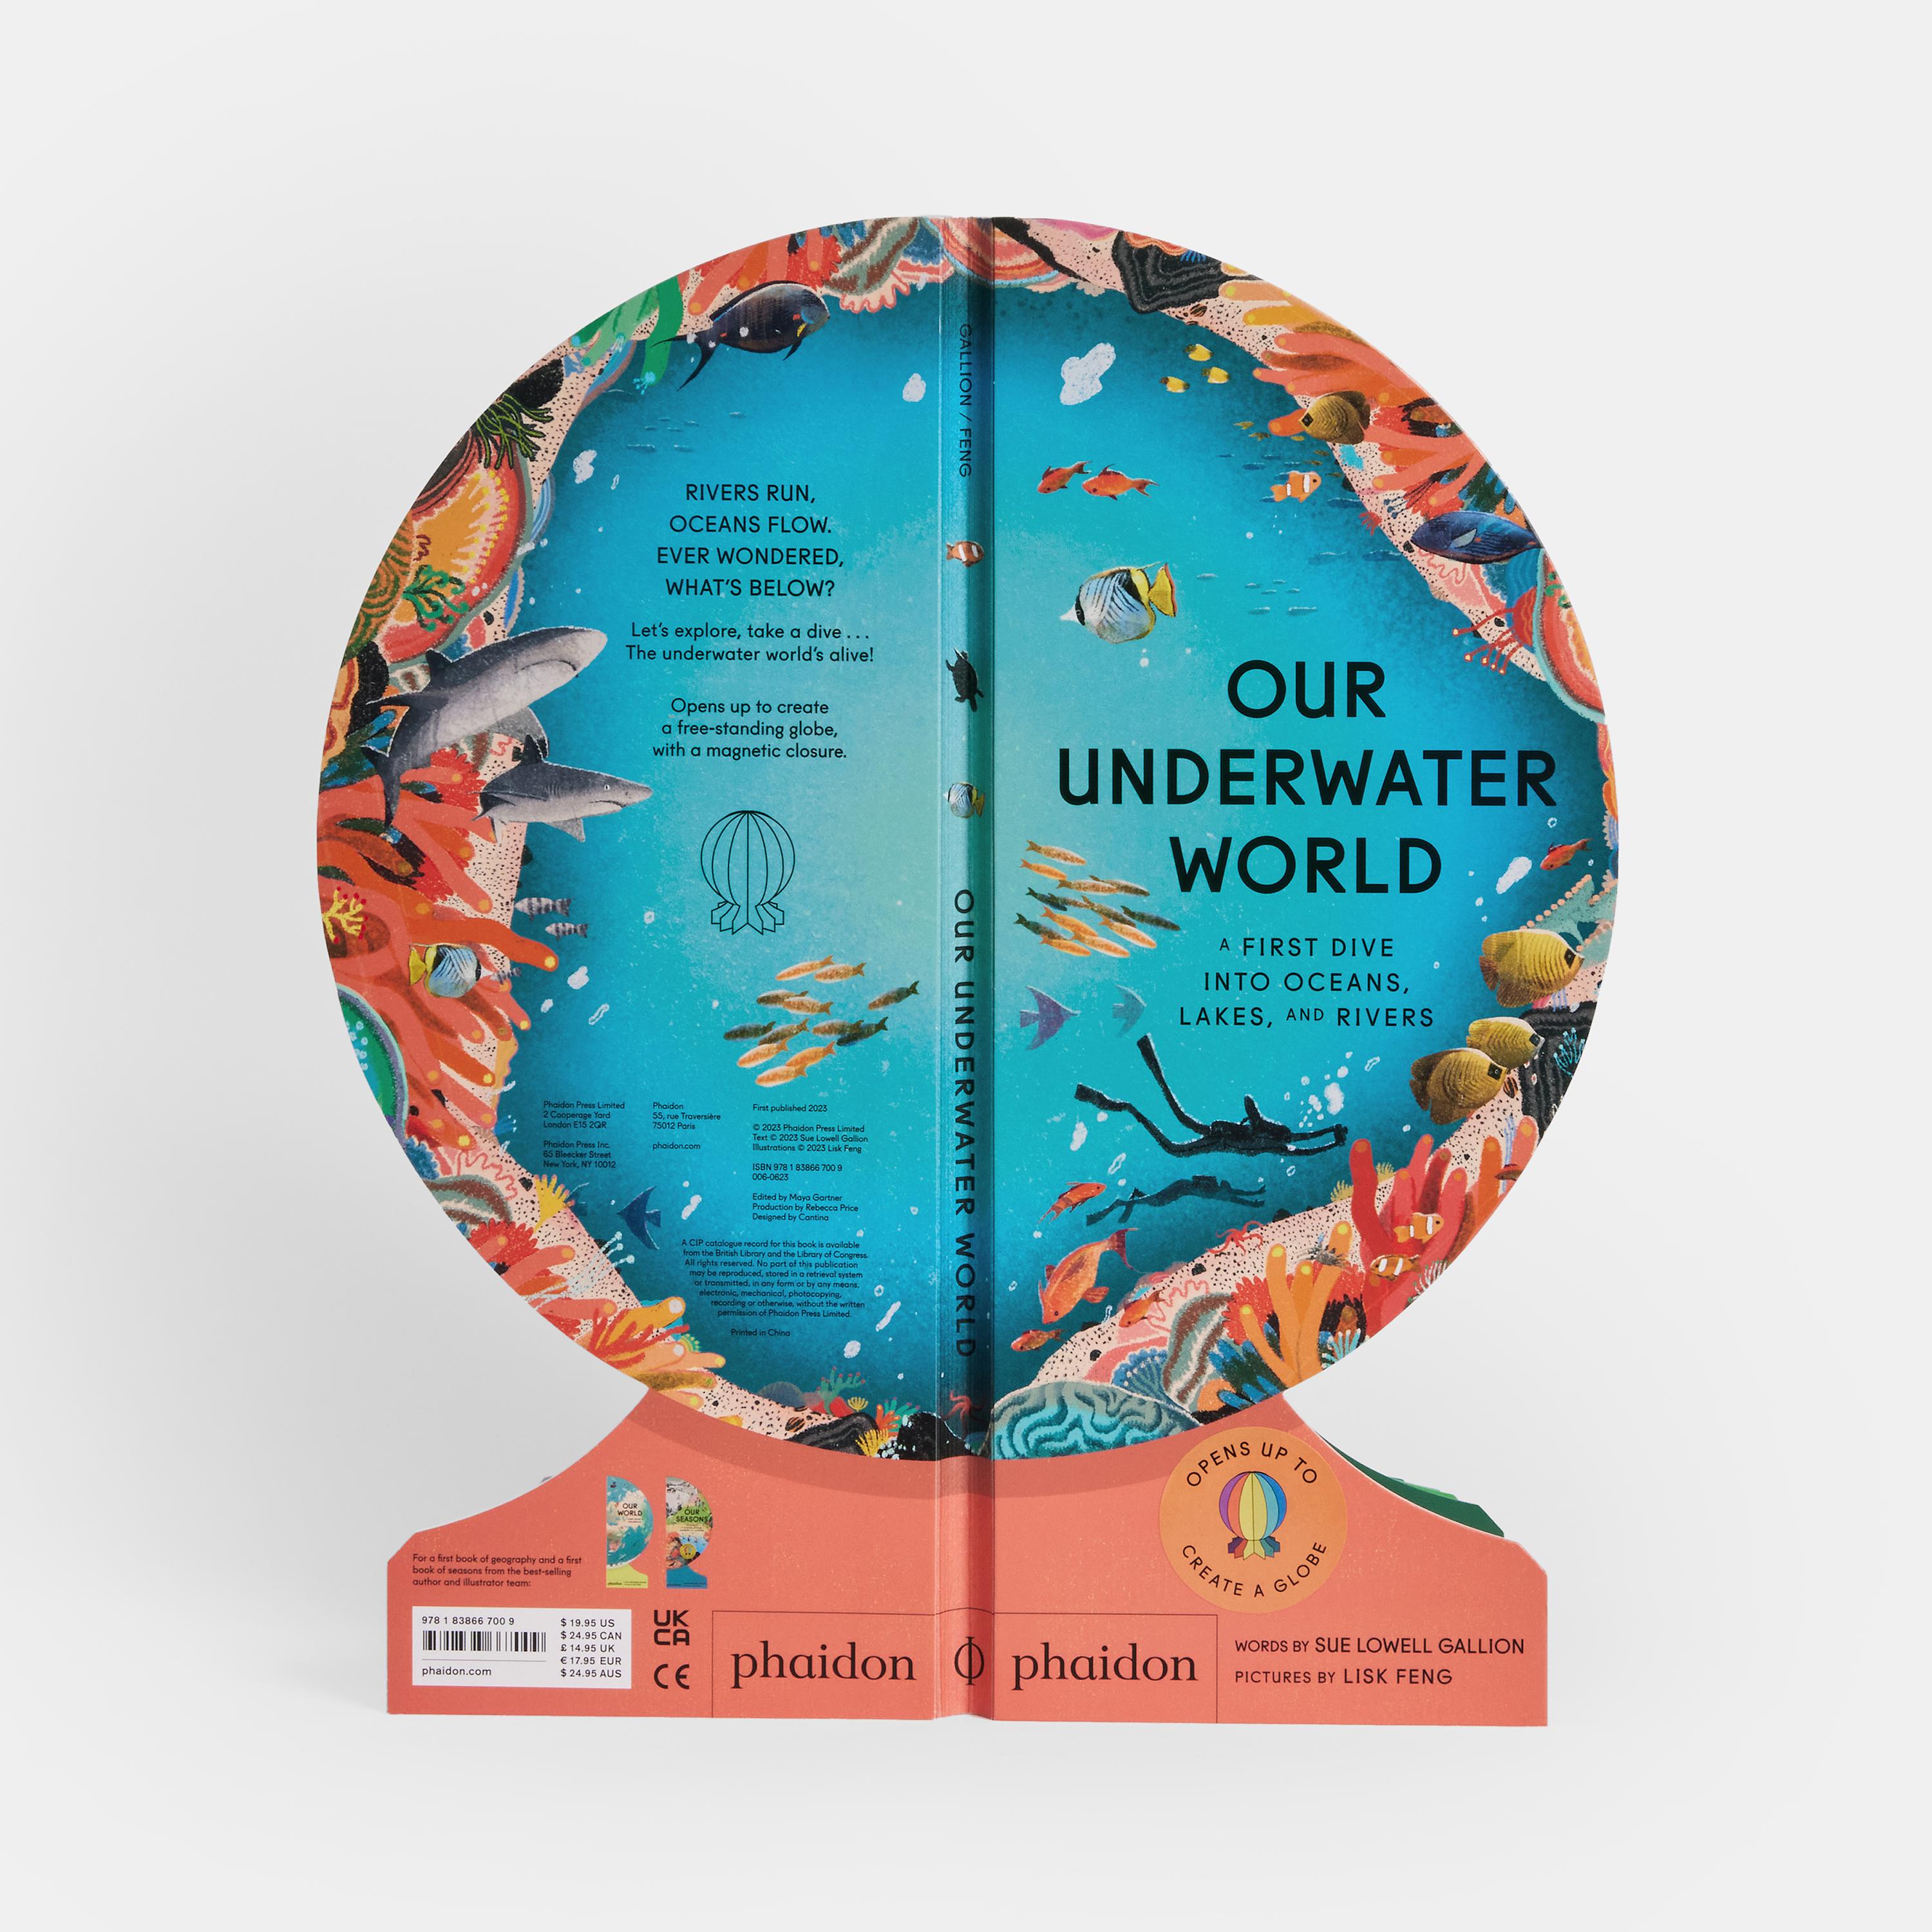 A poetic read-aloud celebration of our planet’s underwater worlds, that opens up to create a freestanding globe

The youngest readers are invited to explore and experience our blue planet’s amazing underwater ecosystems through rhyming verse and